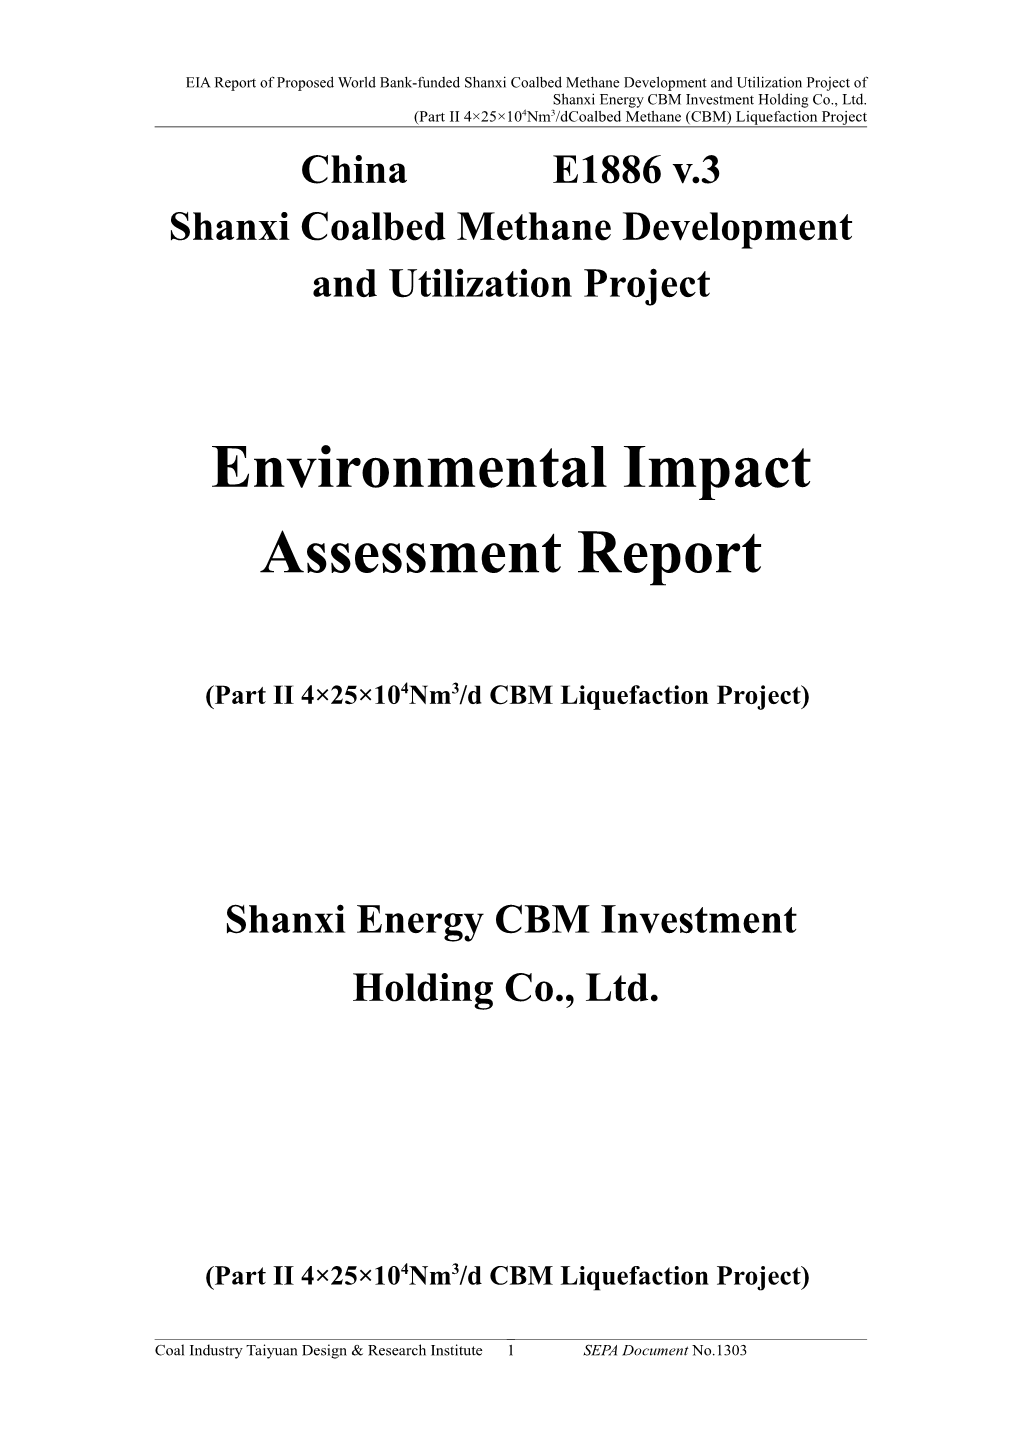 Shanxi Coalbed Methane Development and Utilization Project